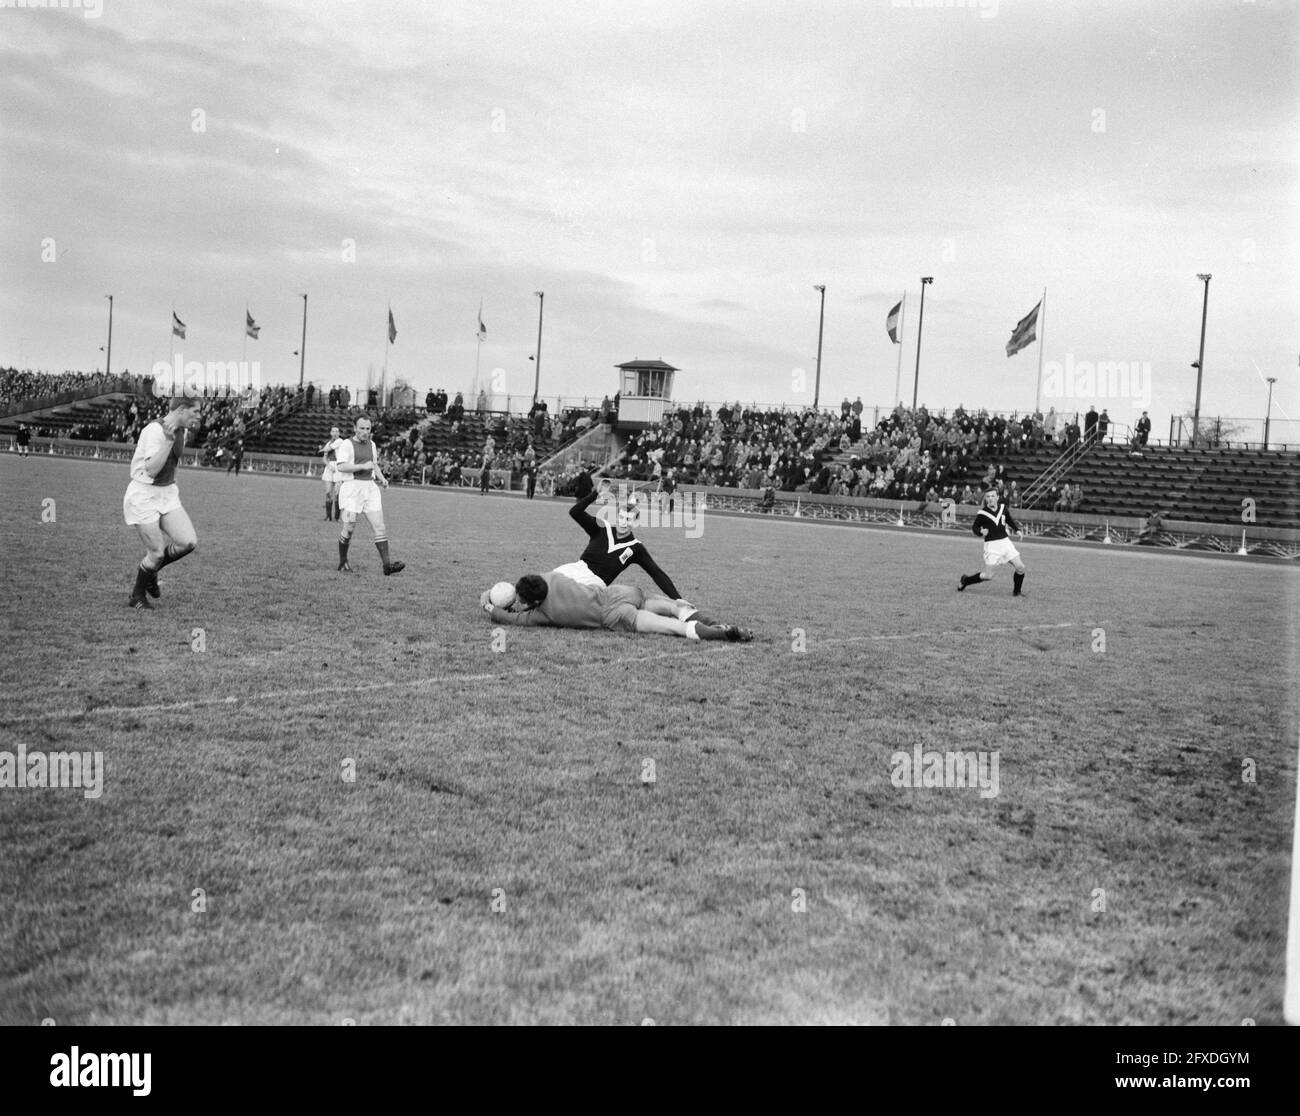 Sportclub Enschede against Ajax, January 21, 1962, sports, soccer, The Netherlands, 20th century press agency photo, news to remember, documentary, historic photography 1945-1990, visual stories, human history of the Twentieth Century, capturing moments in time Stock Photo